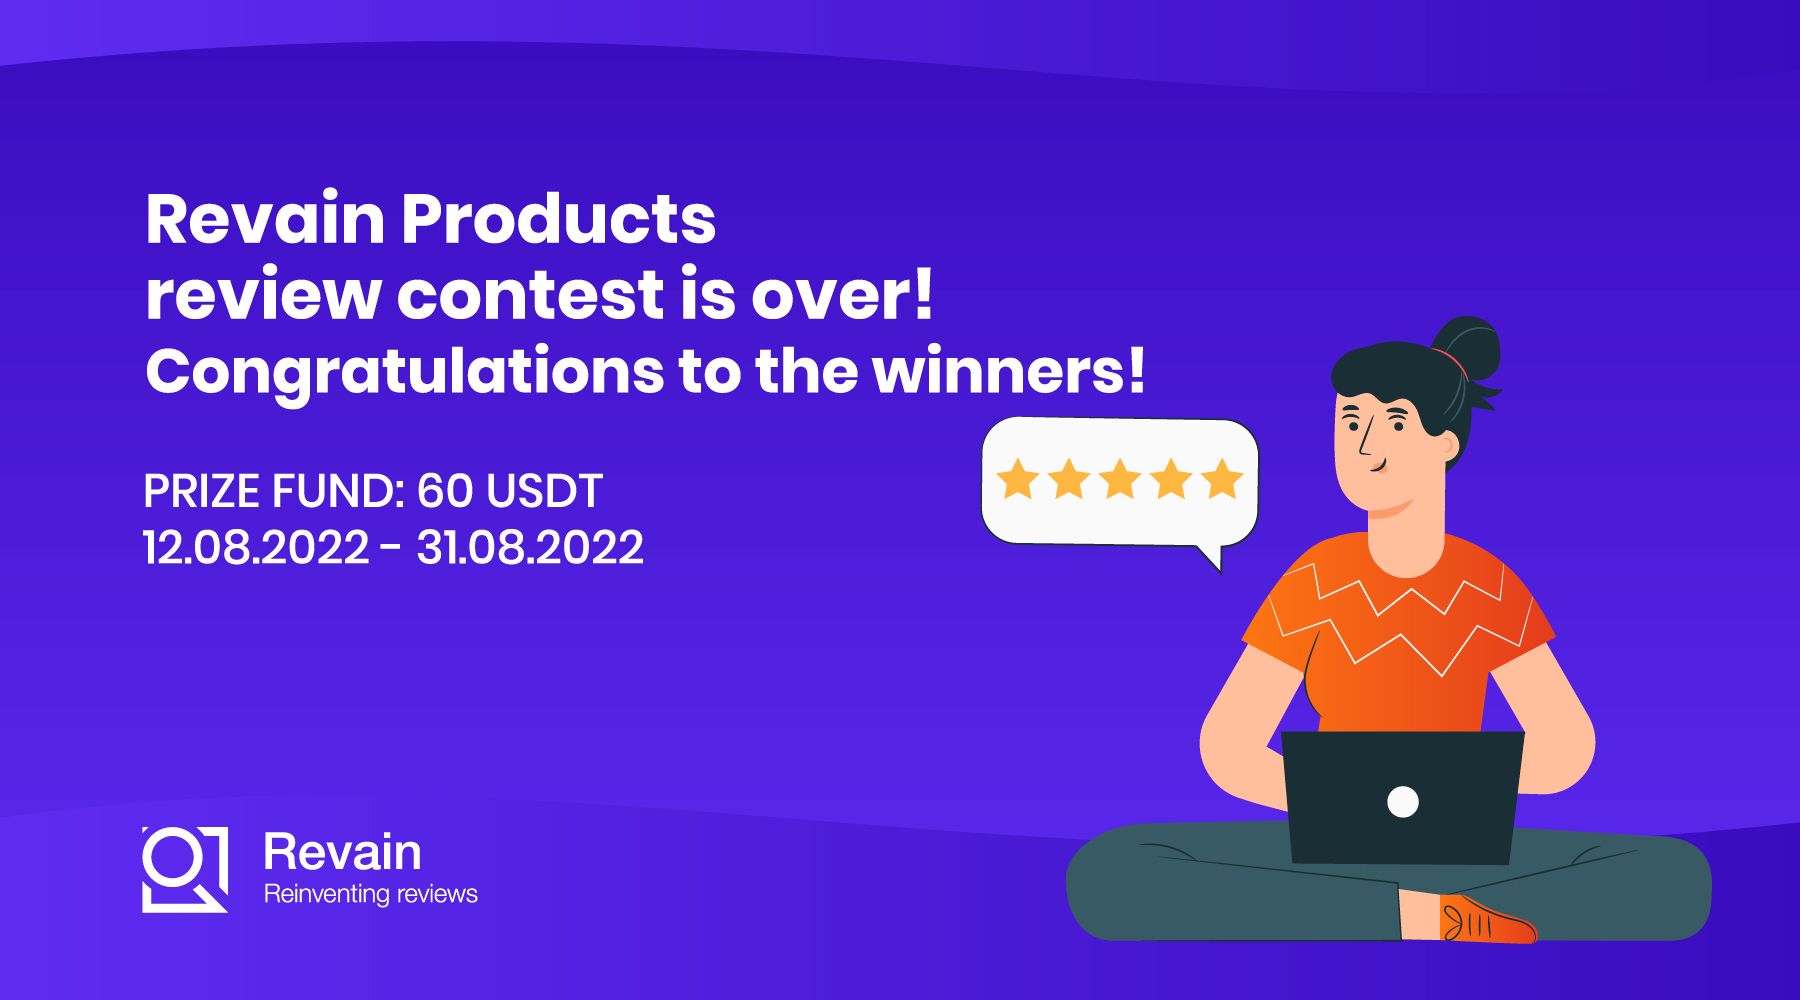 Revain Products review contest is over!